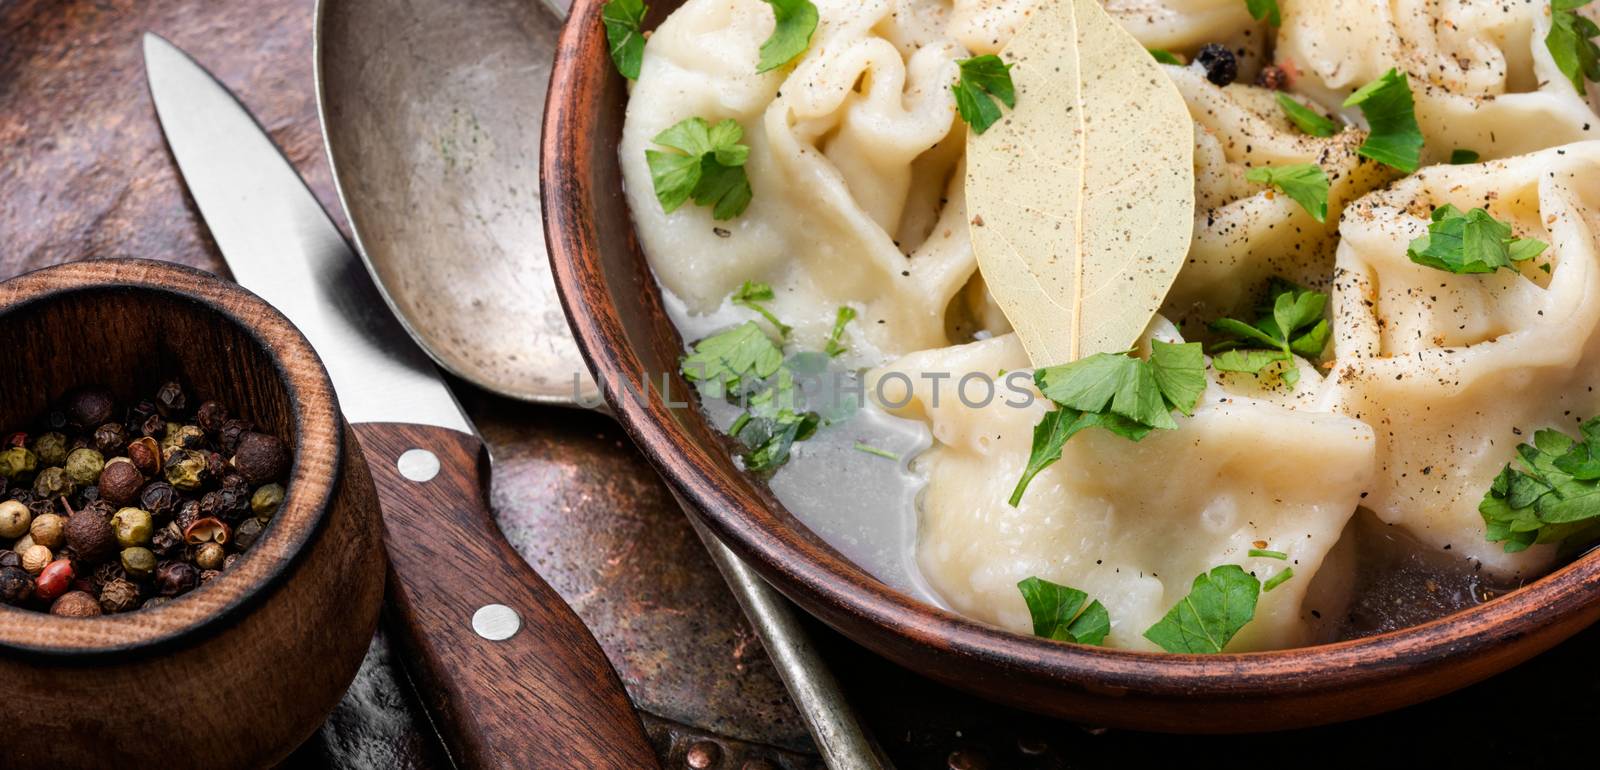 Delicious dumplings in the bowl on the table.Chinese dumplings for dinner